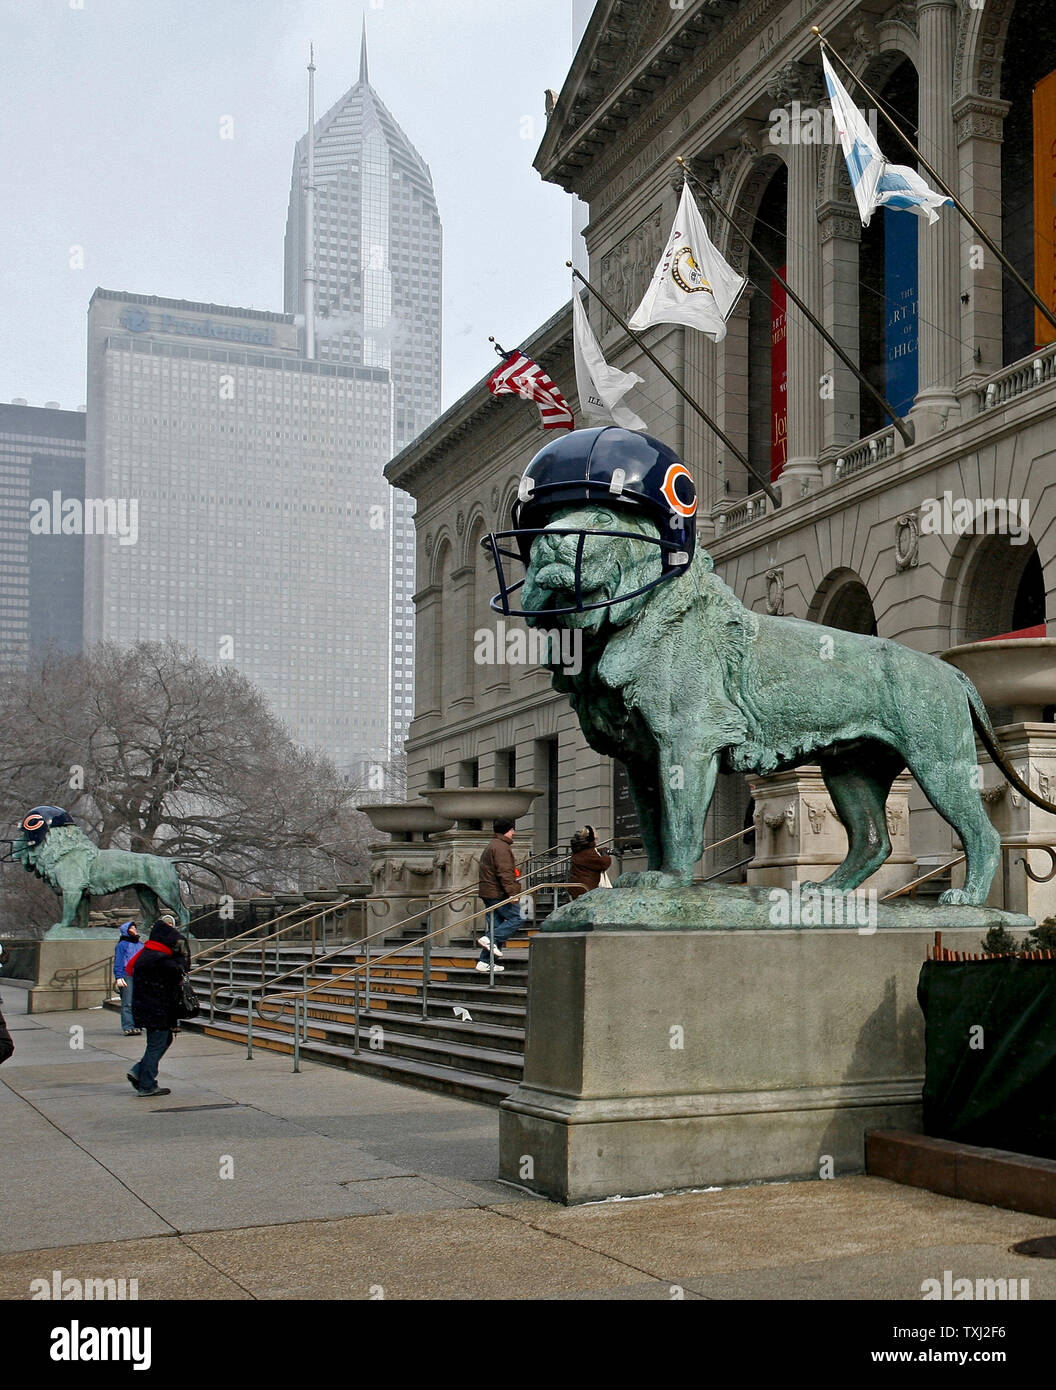 Two bronze lions wear fiberglass Chicago Bears helmets at The Art Institute of Chicago on February 2, 2007, in Chicago. The lions were fitted with fiberglass helmets to celebrate the Bears winning season. The Bears play the Indianapolis Colts in Super Bowl XLI on Sunday. (UPI Photo/Brian Kersey) Stock Photo